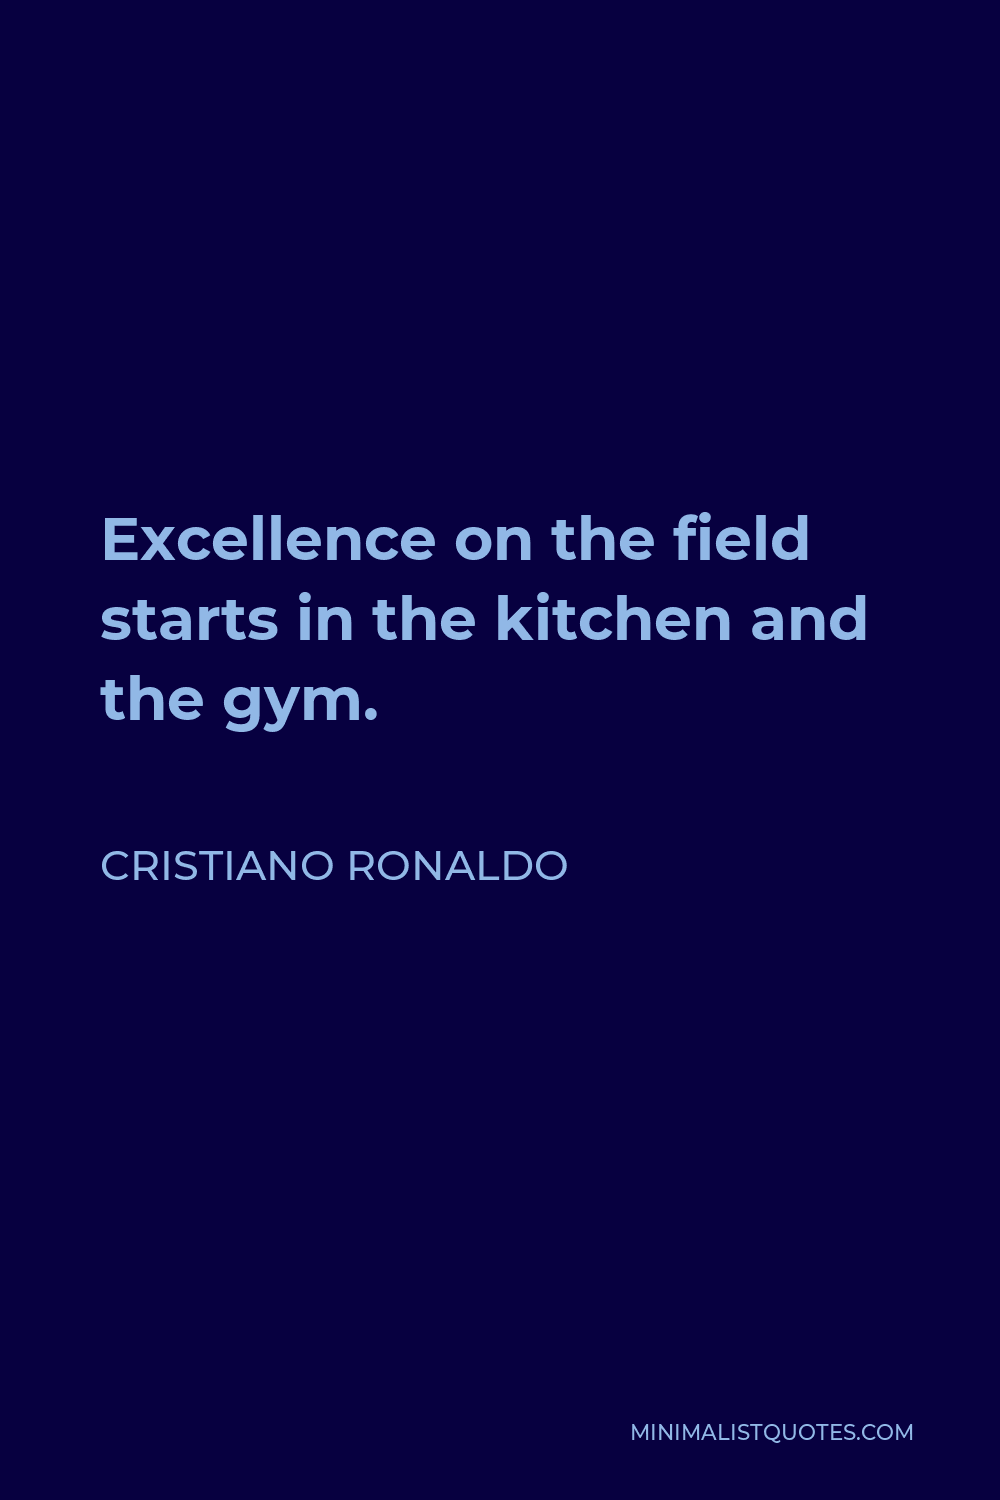 Cristiano Ronaldo Quote - Excellence on the field starts in the kitchen and the gym.